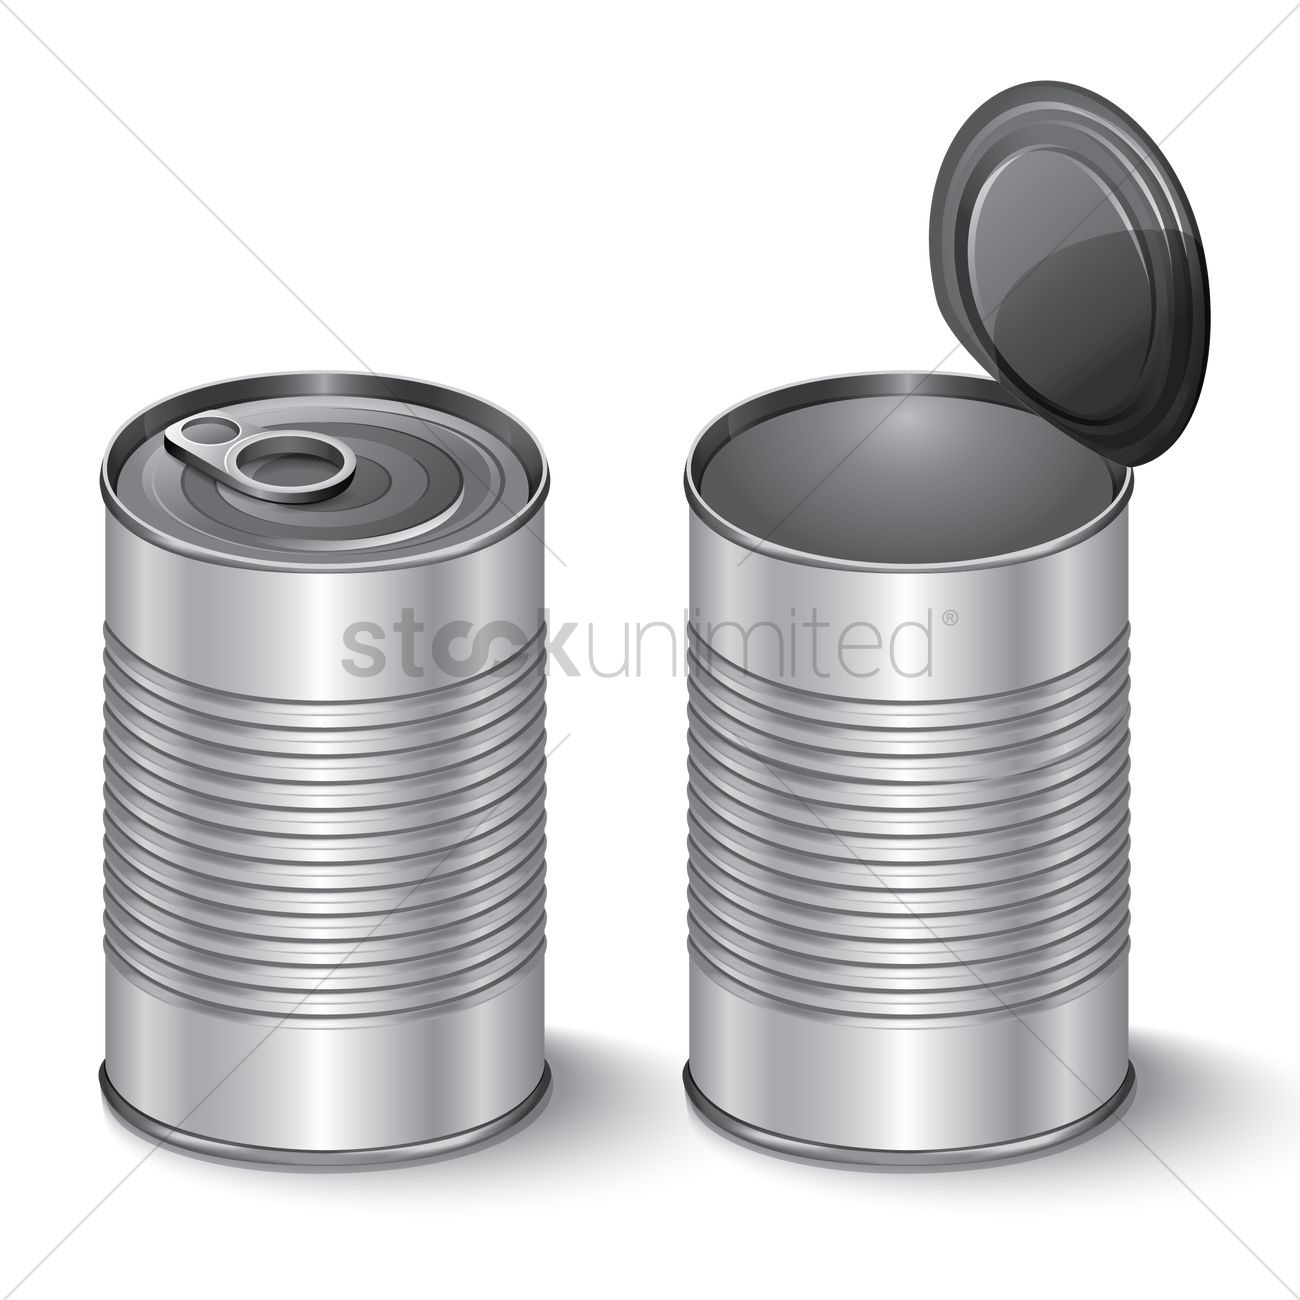 metal-cans-clipart-clipground